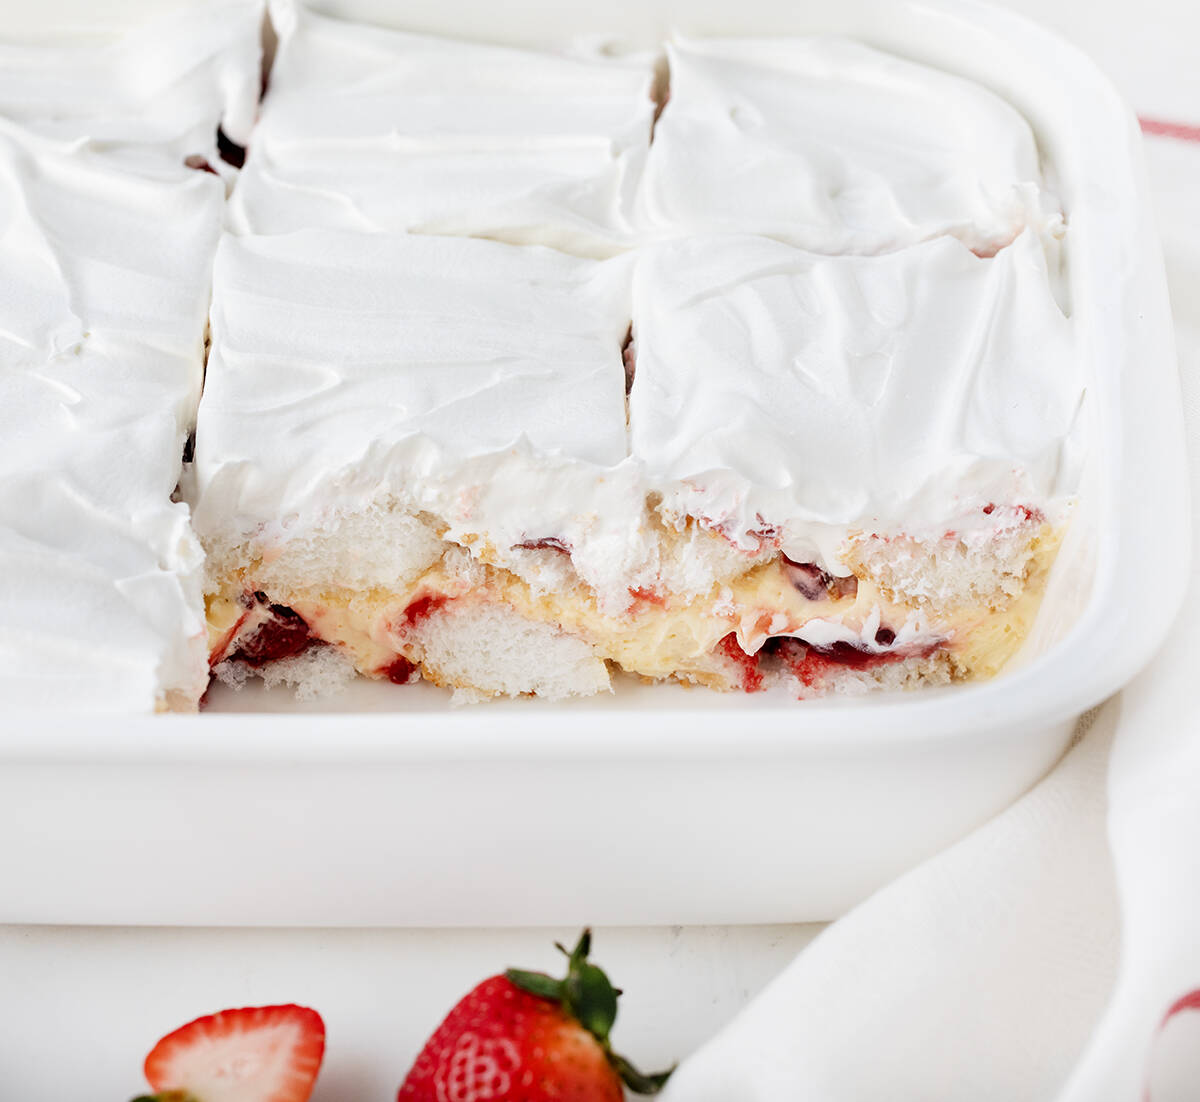 Pan of Strawberry Heaven Dessert with two pieces removed showing inside texture.